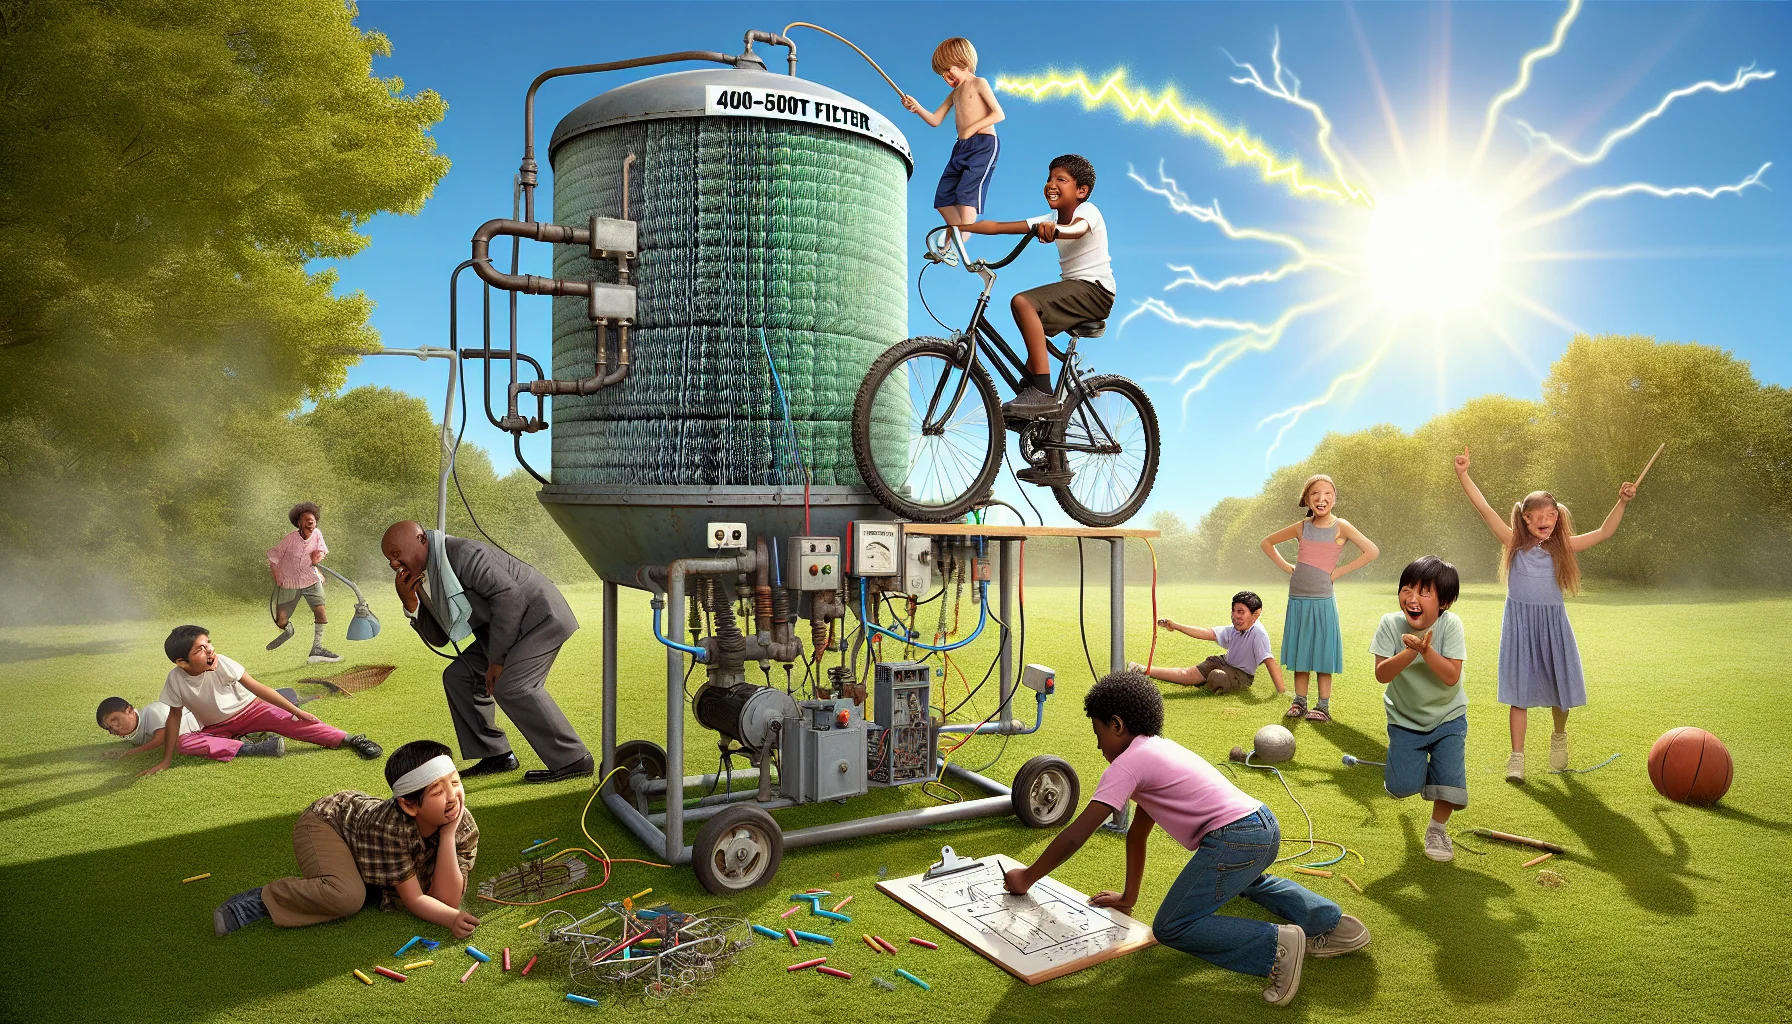 Create a comedic scene of a 4000-5000 Watt Filter ingeniously repurposed to generate electricity. Picture a verdant grassy field, under the brilliant summer sun. In the middle, is the bulky machine; unexpectedly, instead of stodgy engineers, a group of children playing around it, each attempting their own innovative methods. A Middle-Eastern boy pedals furiously on a bike attached to the filter, while an Asian girl giggles while turning an old-school hand-crank. A Hispanic teenager explain theoretical principles with chalk on the machine, and a Black girl showcasing hurry in setting up a makeshift windmill. Electricity sparks joyously from the filter, adding to the humor.